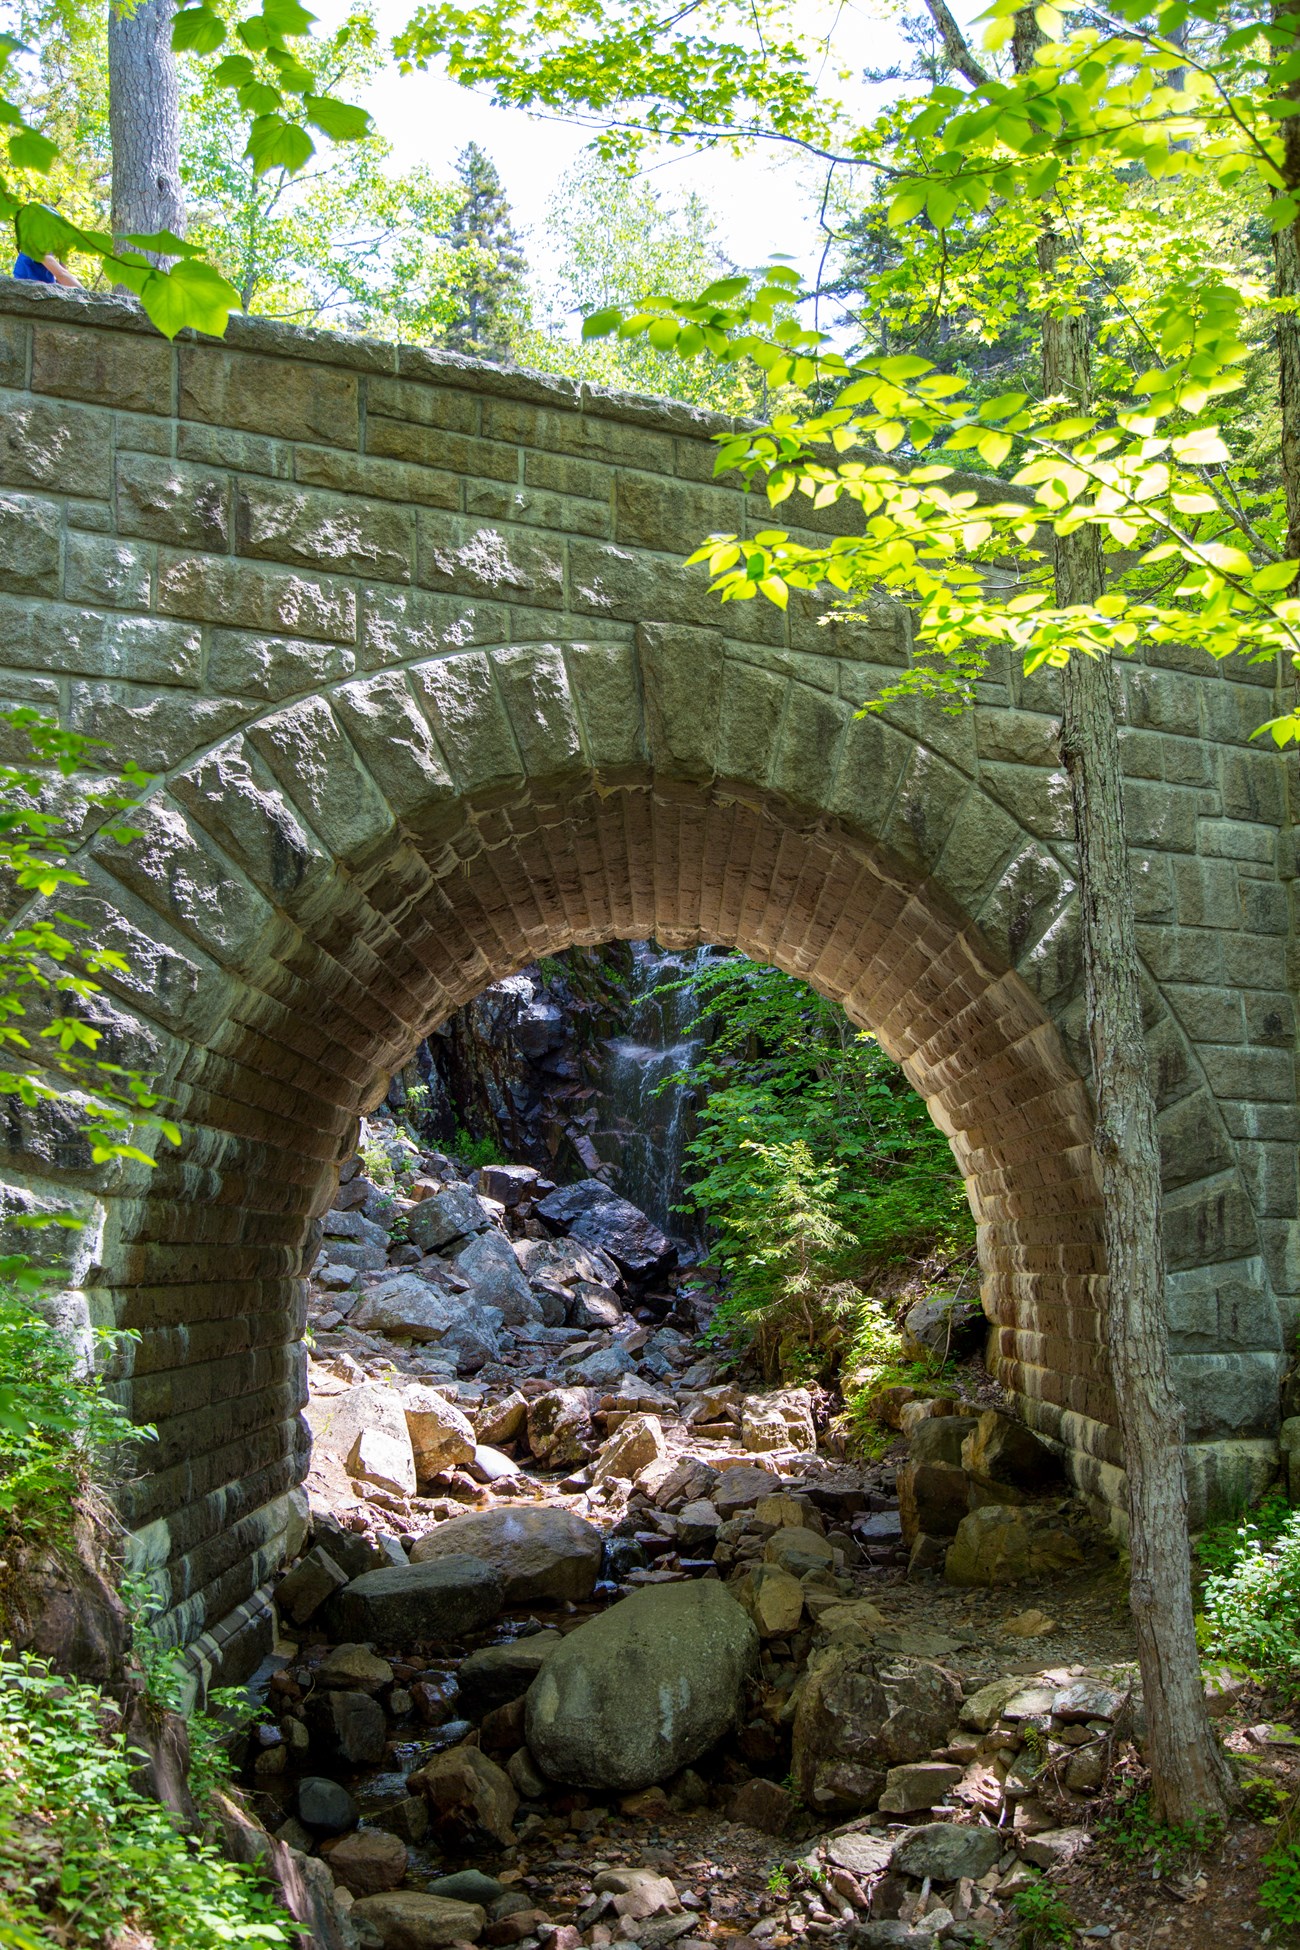 Stone bridge with waterfall in the background